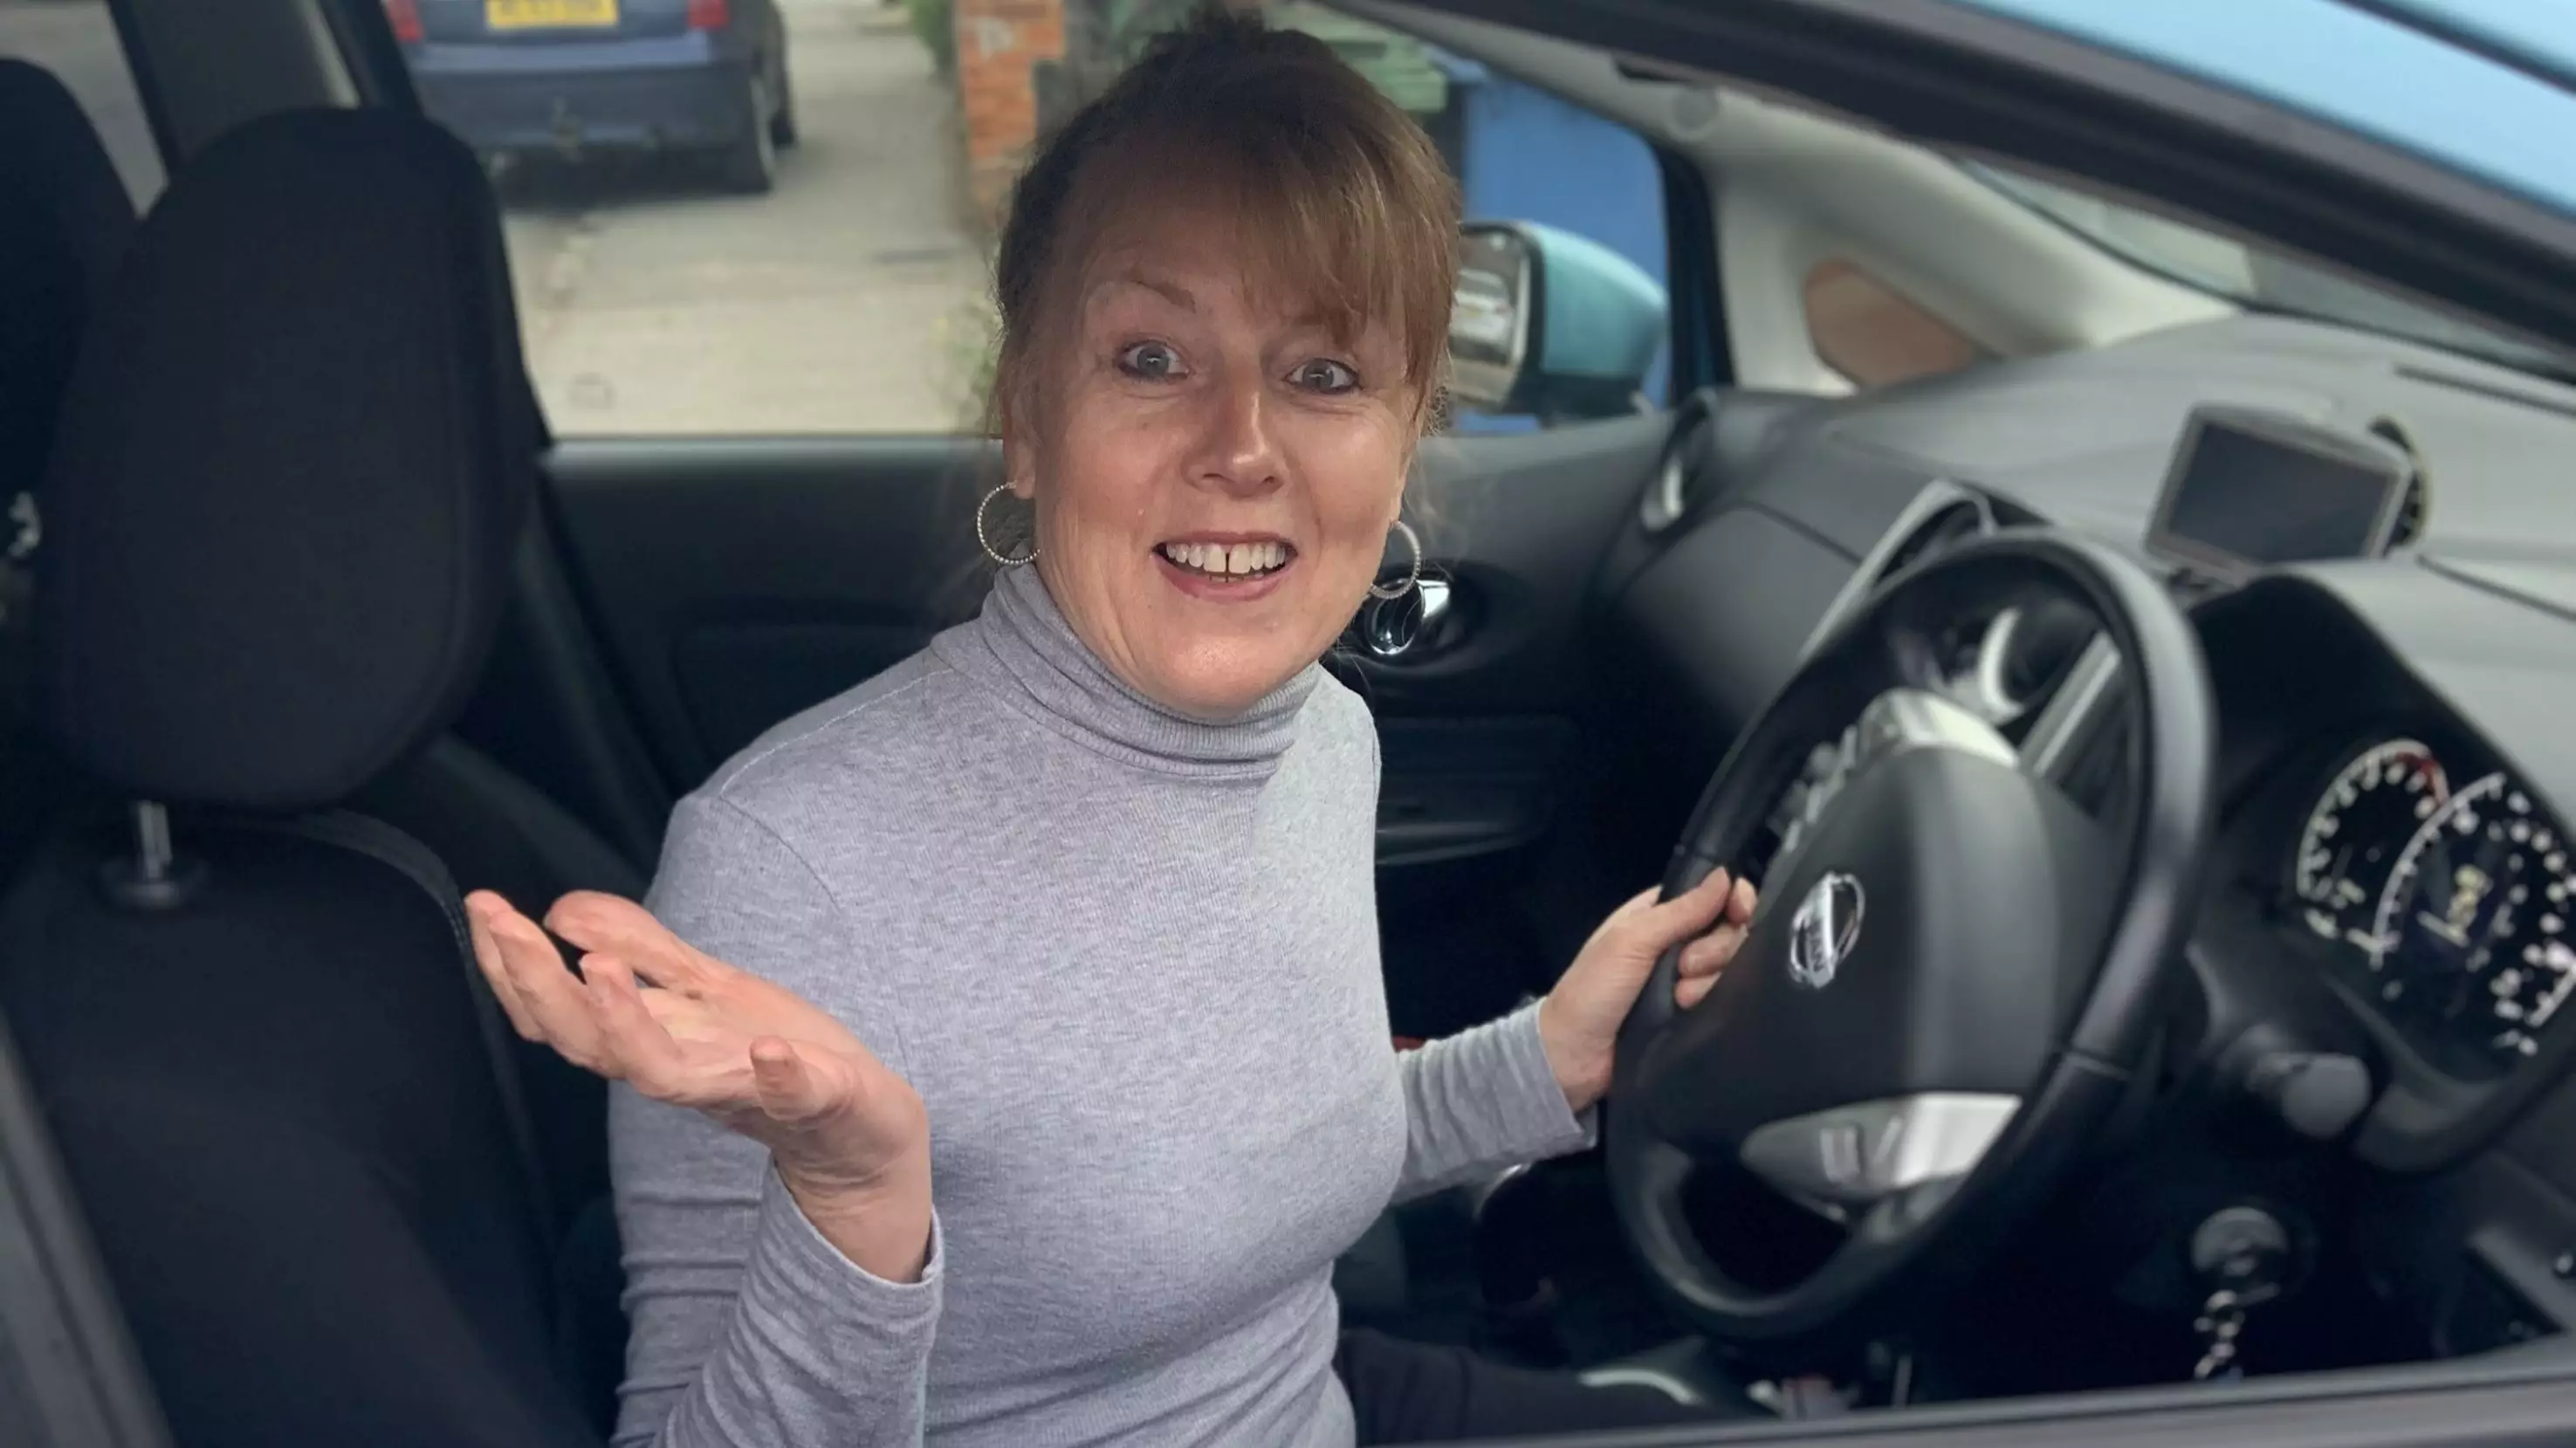 Mum Shocked By Sat-Nav That Swears At Her While Giving Directions